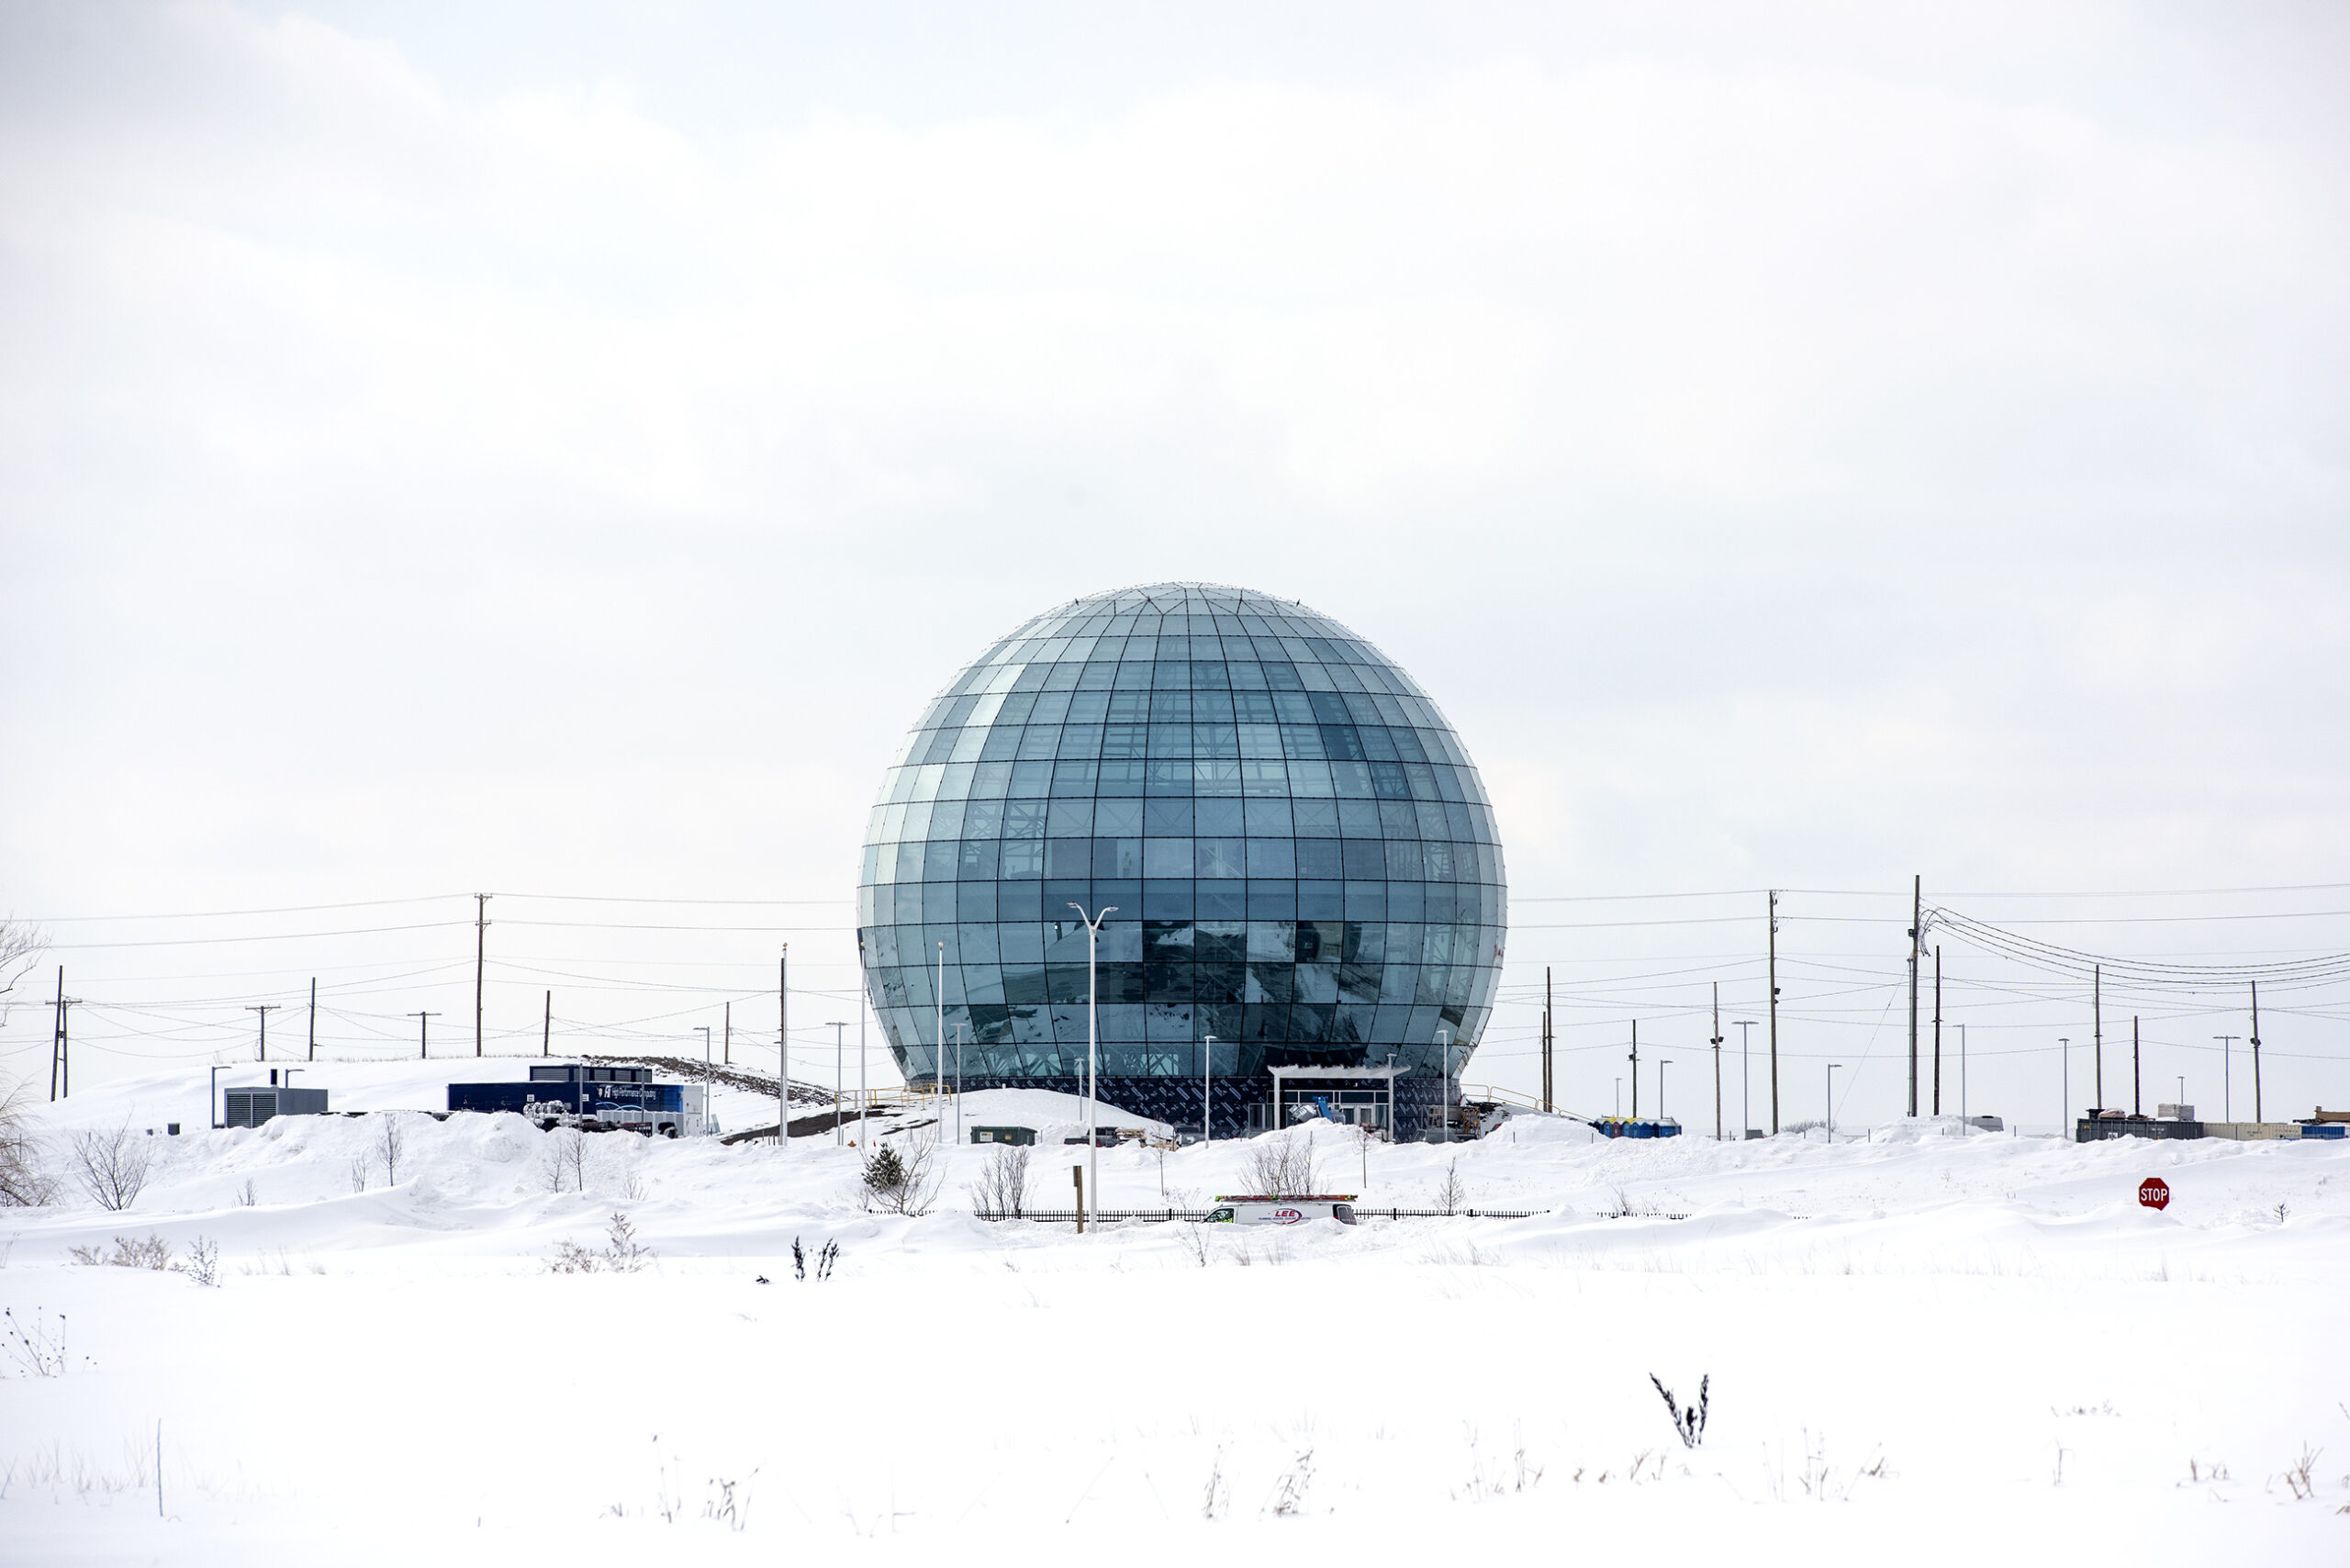 A large glass globe is surrounded by snow and a white cloudy sky.